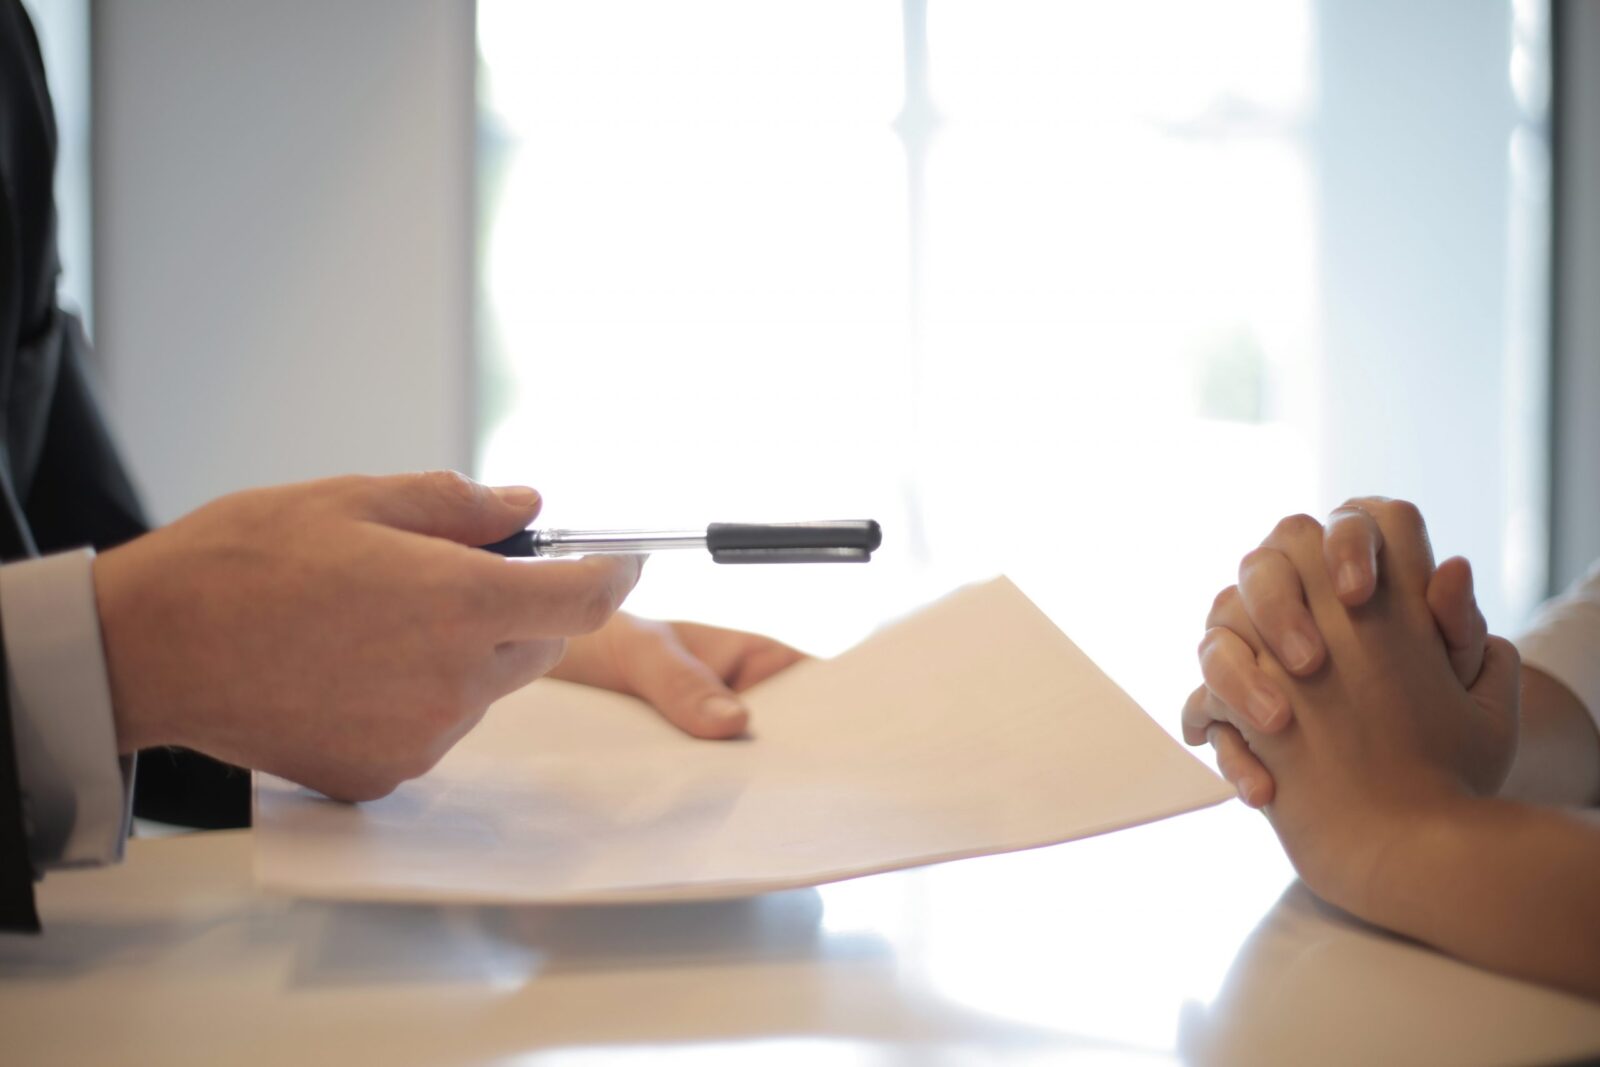 A homebuyer about to sign purchase agreement from the seller's agent